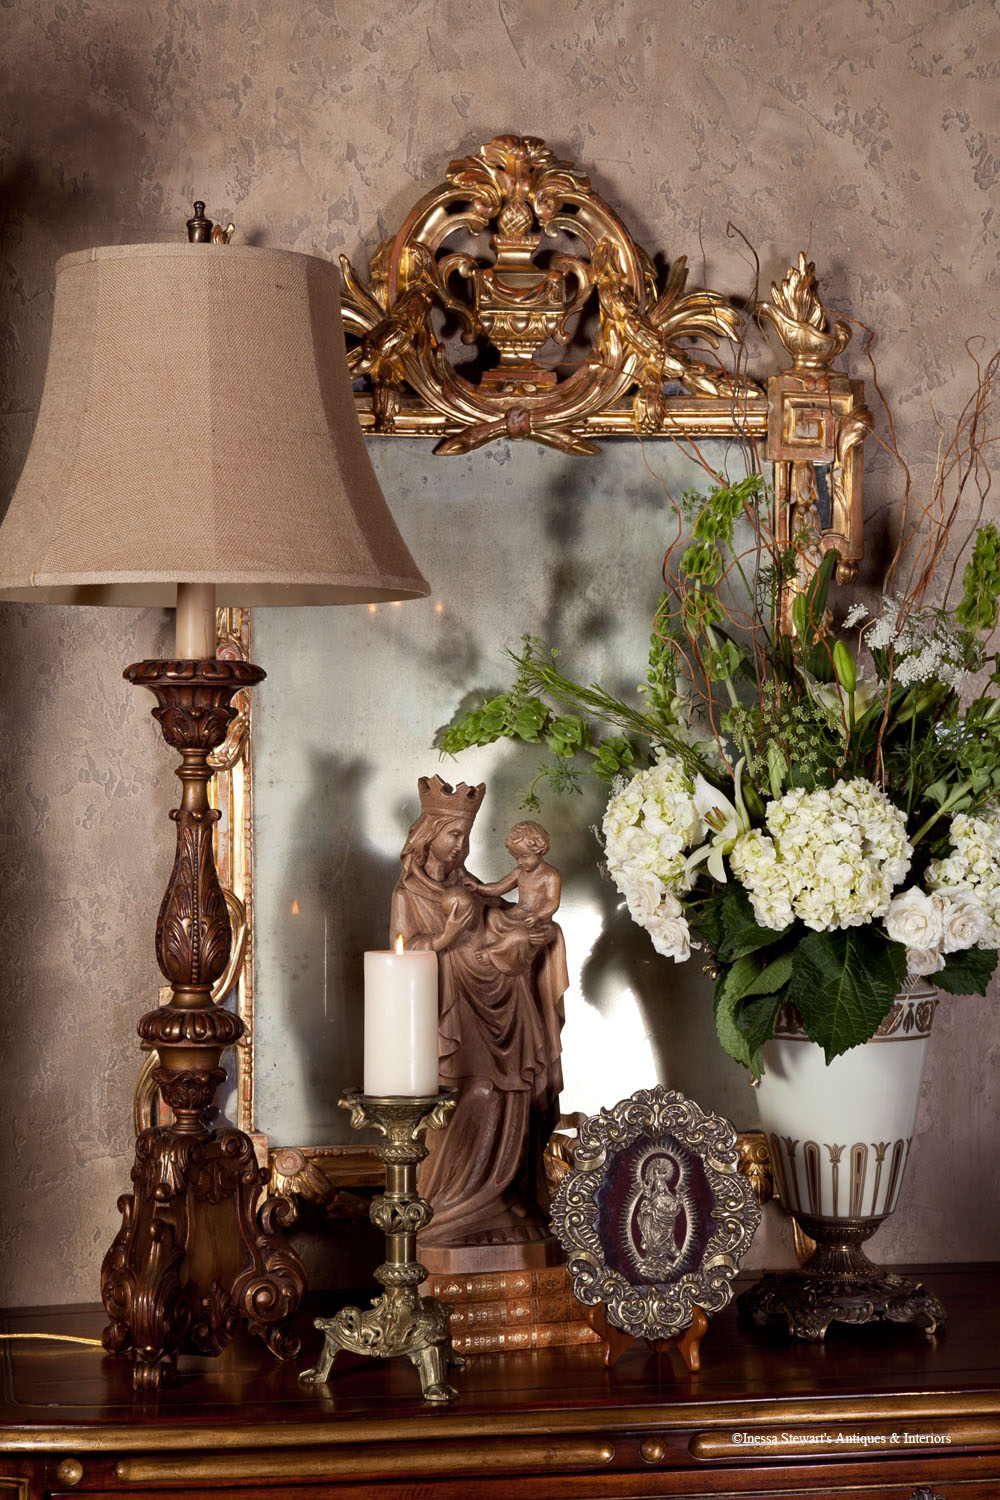 Antique Virgin Mary Statue, flowers, lamp, mirror, at Inessa Stewart's Antiques